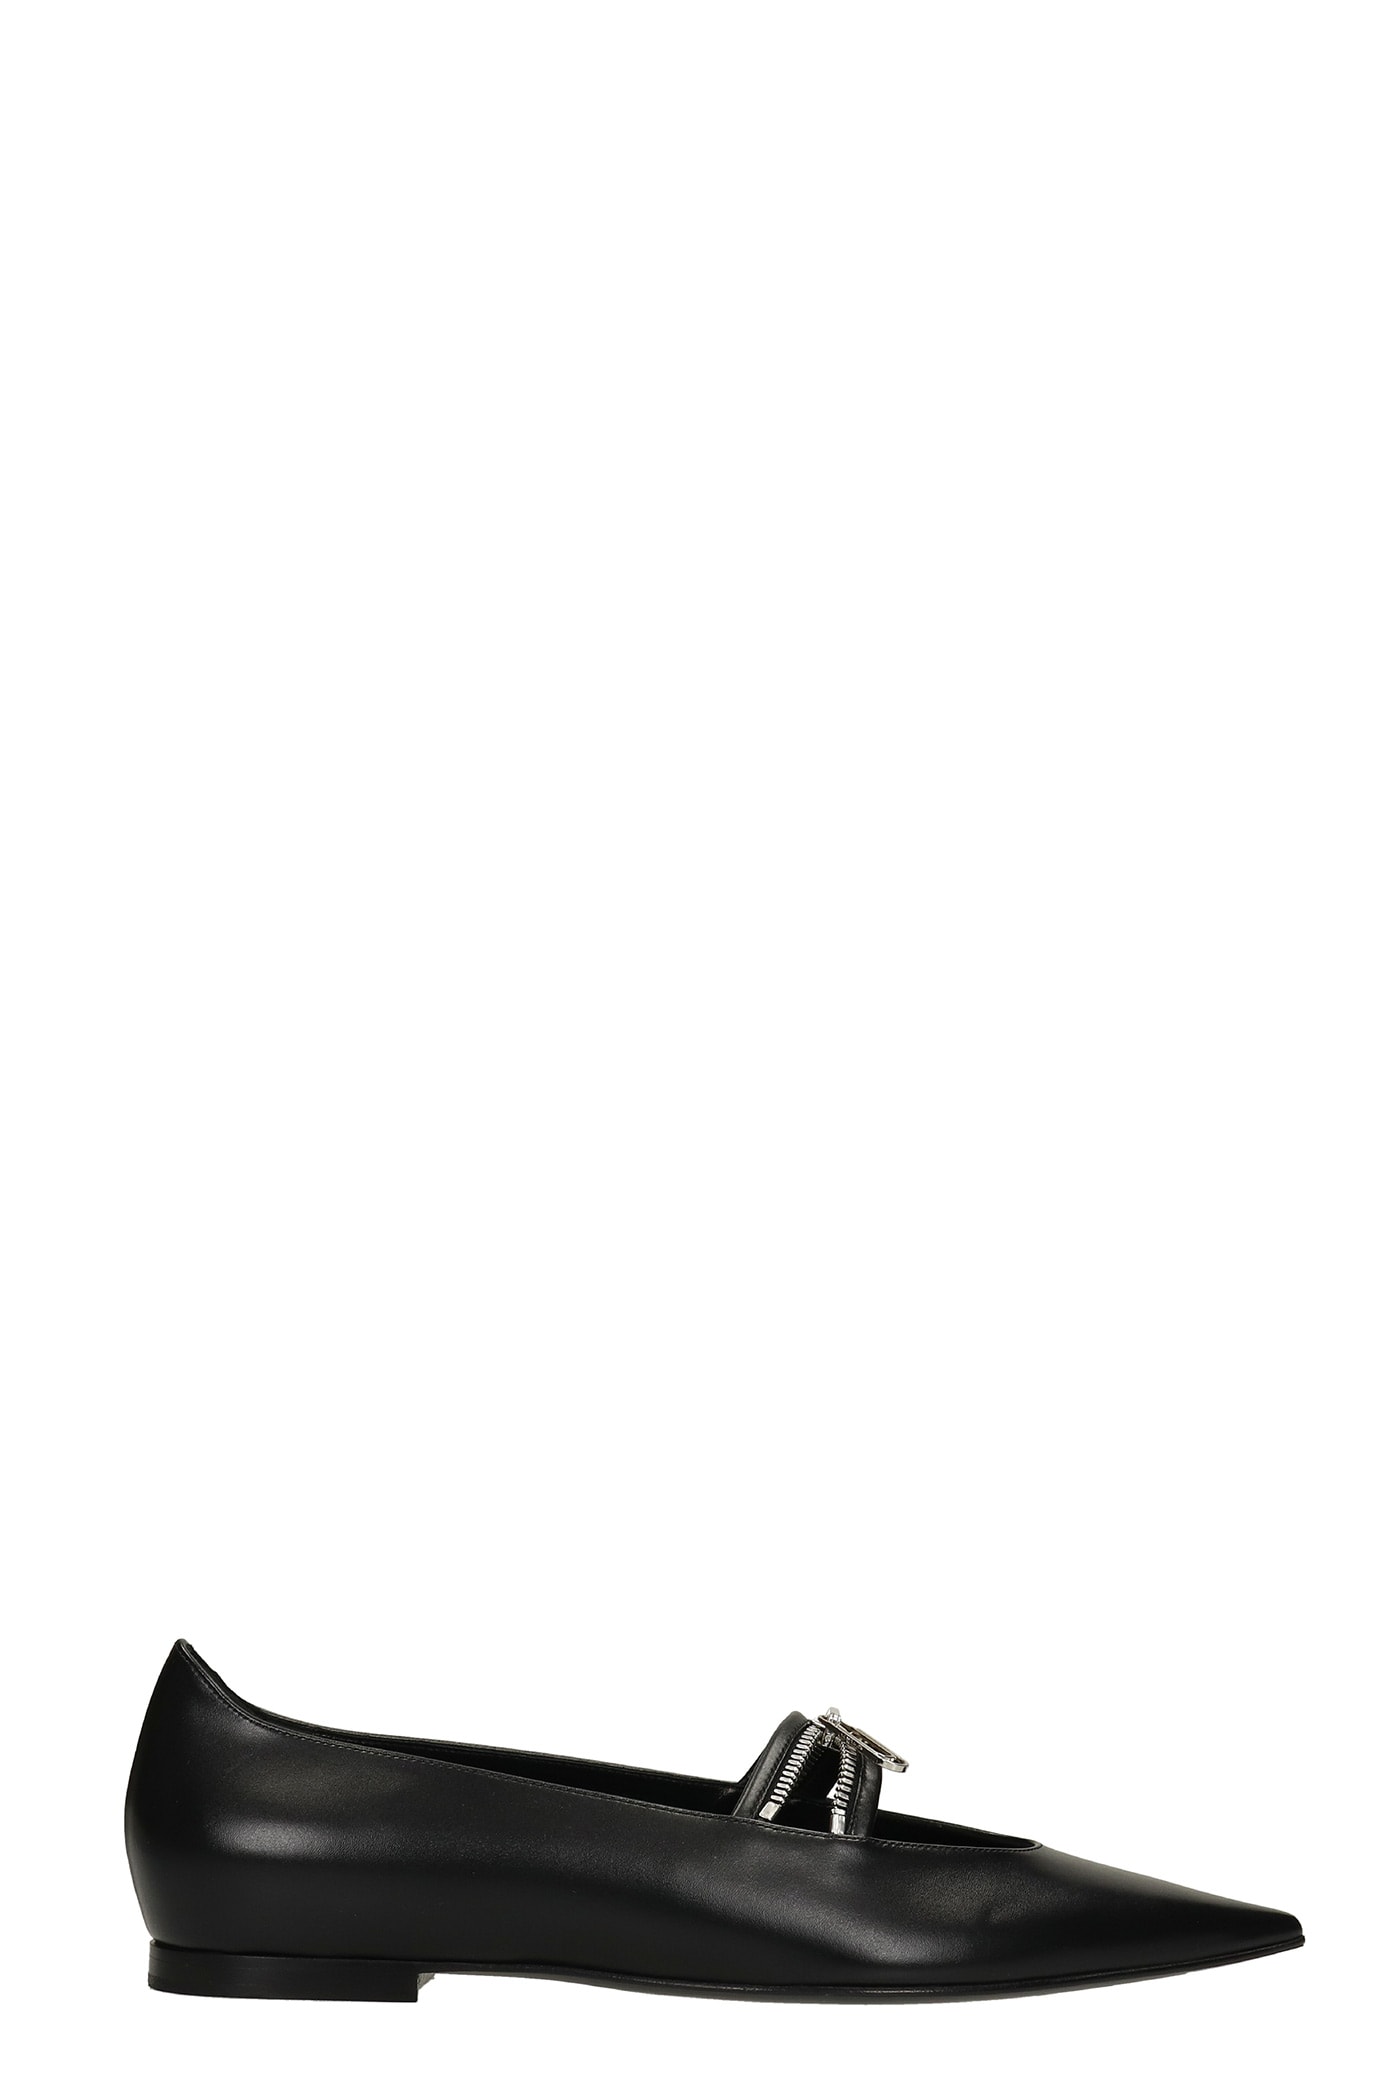 Off-White Ballet Flats In Black Leather